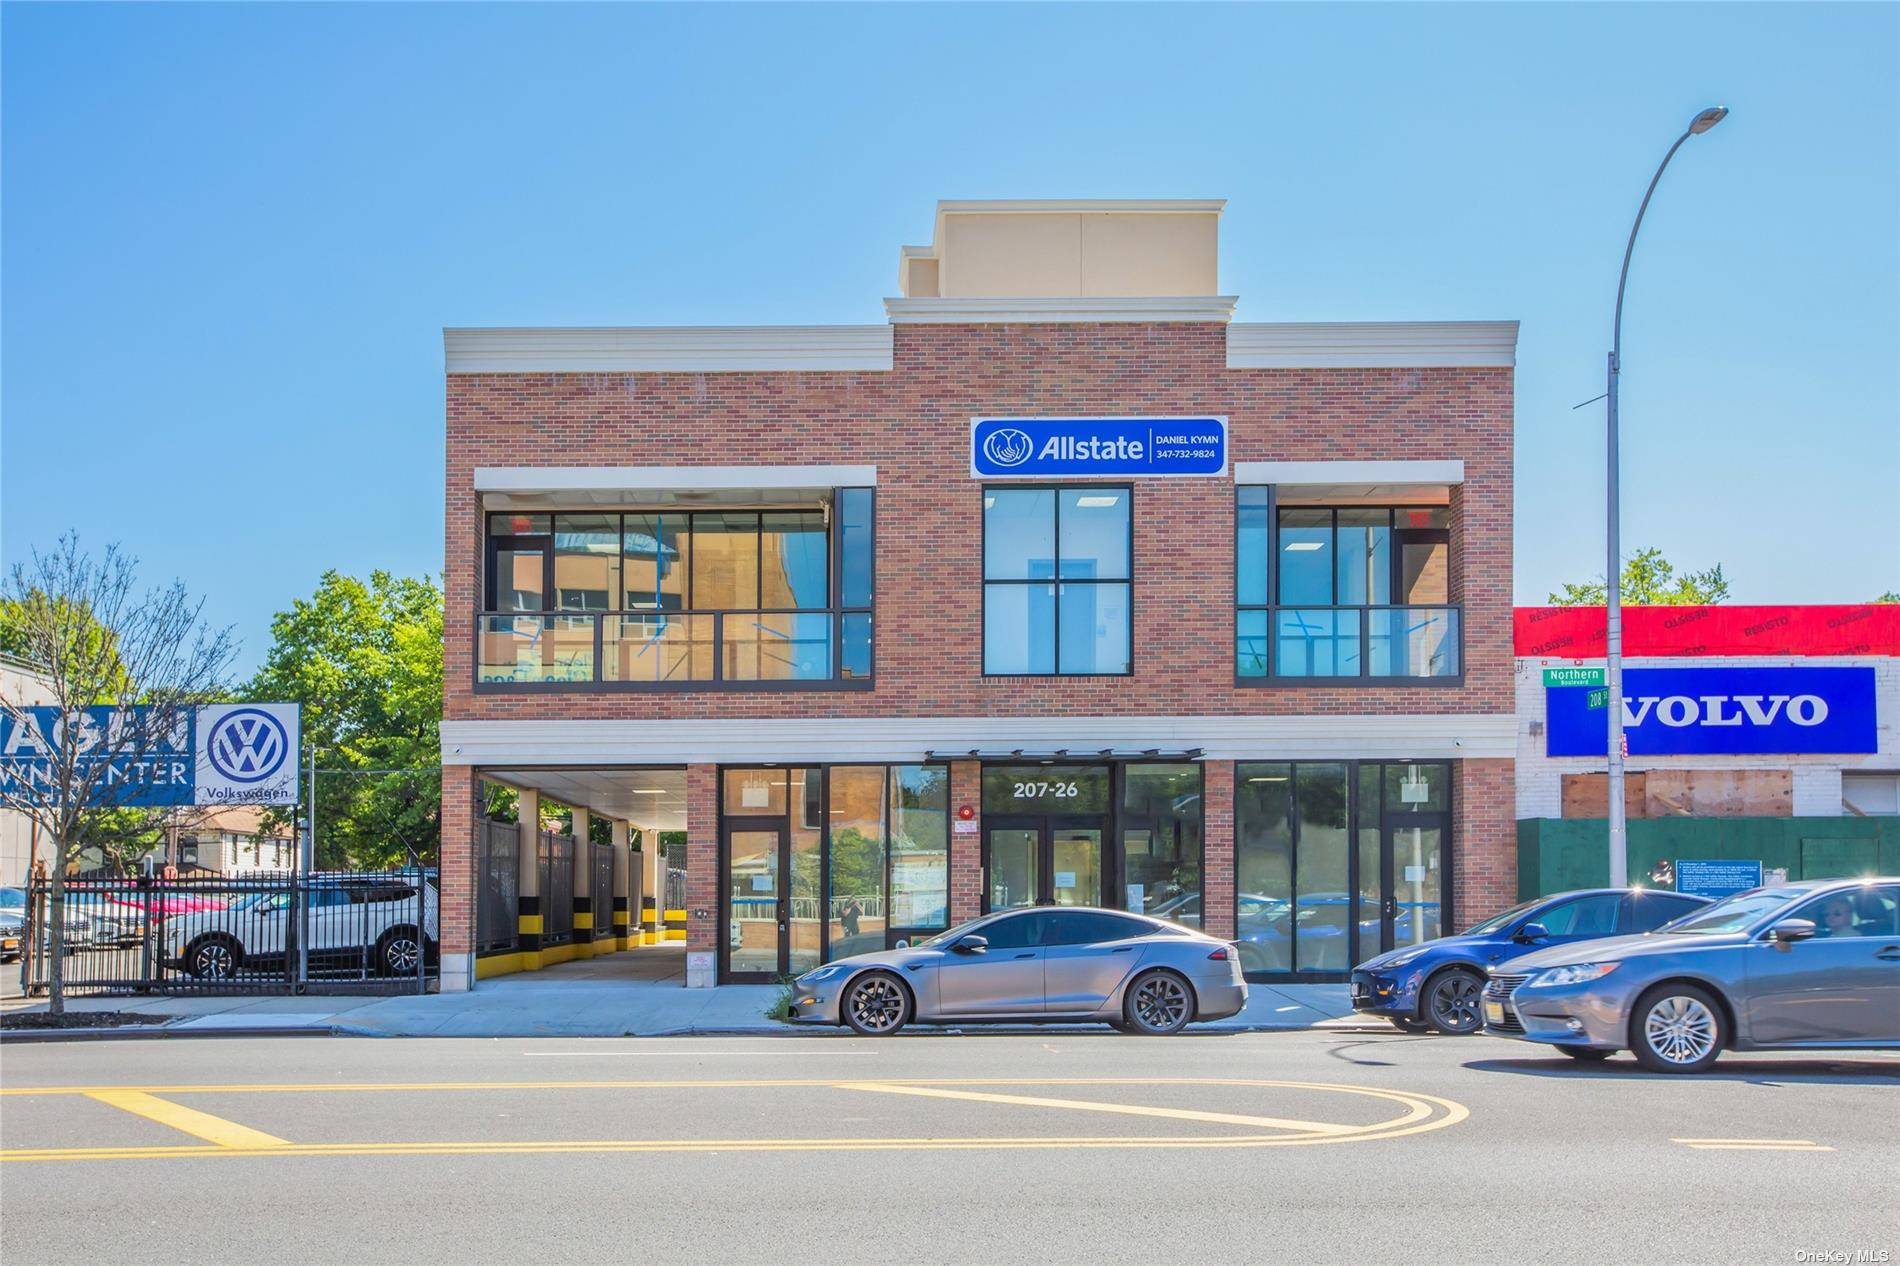 New construction. 2280 SF Retail amp ; office space on the ground floor.